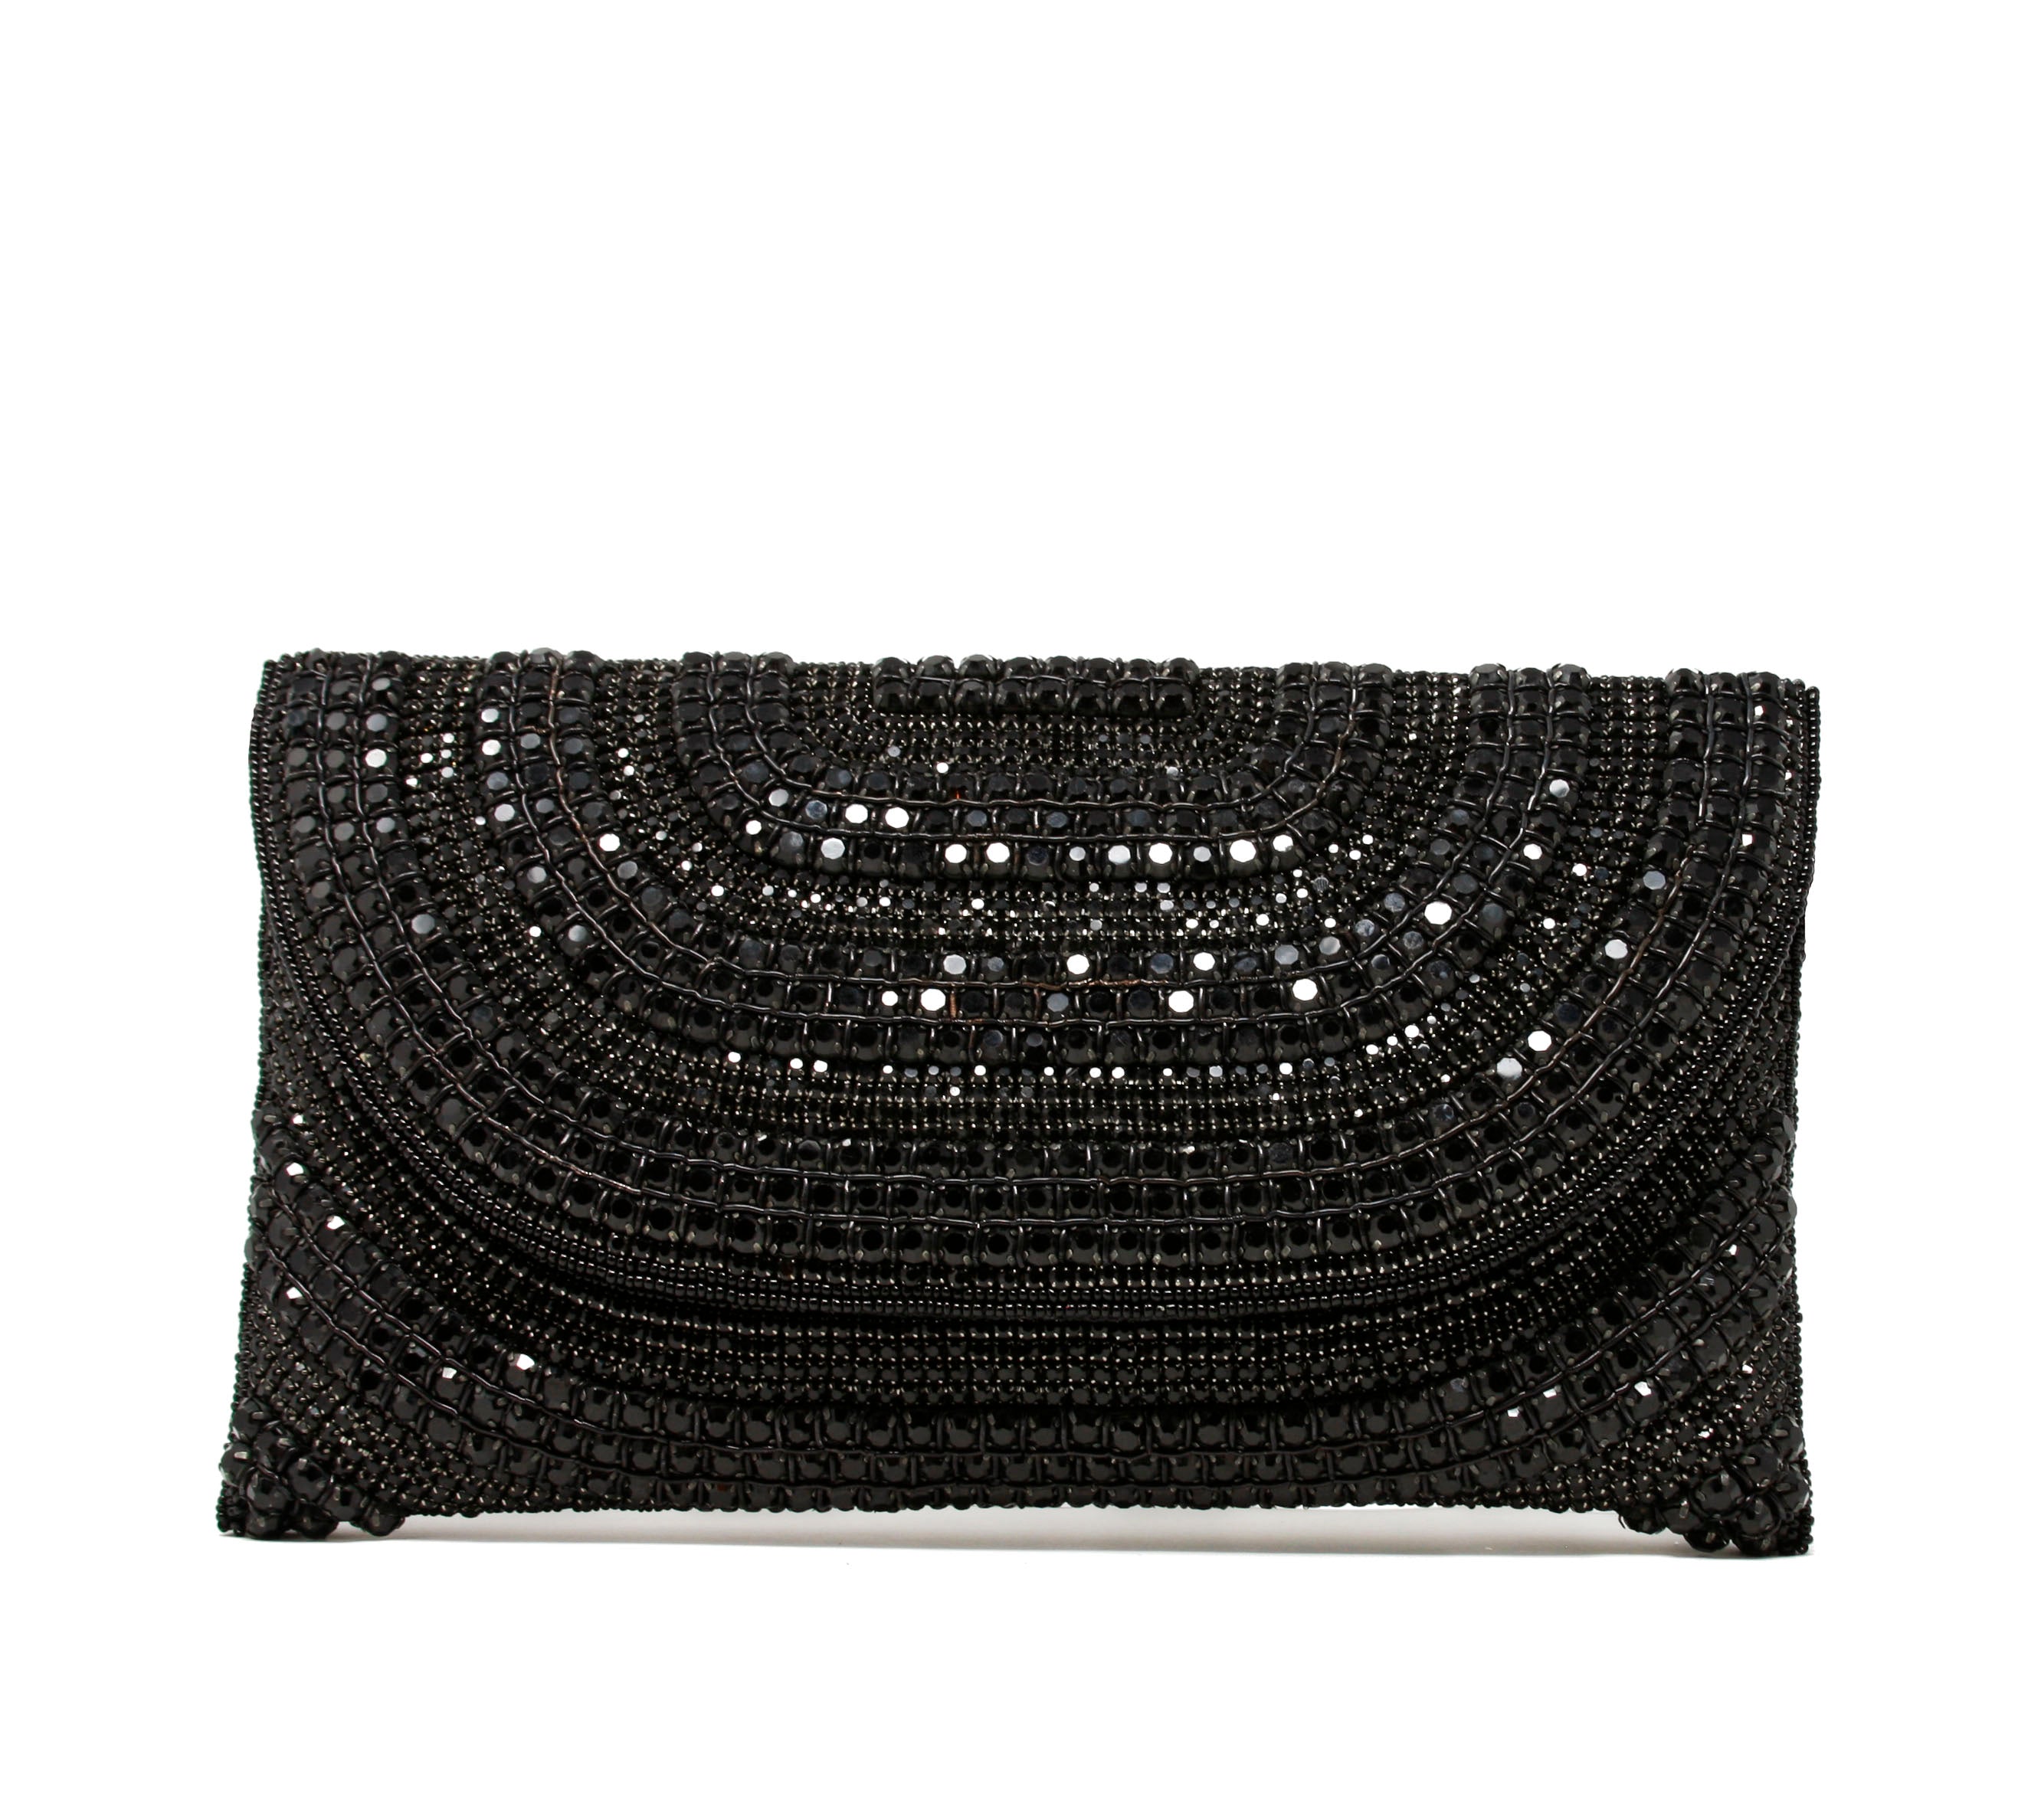 Black, twisting beaded wristlet with silver crystals evening bag included inside pocket.